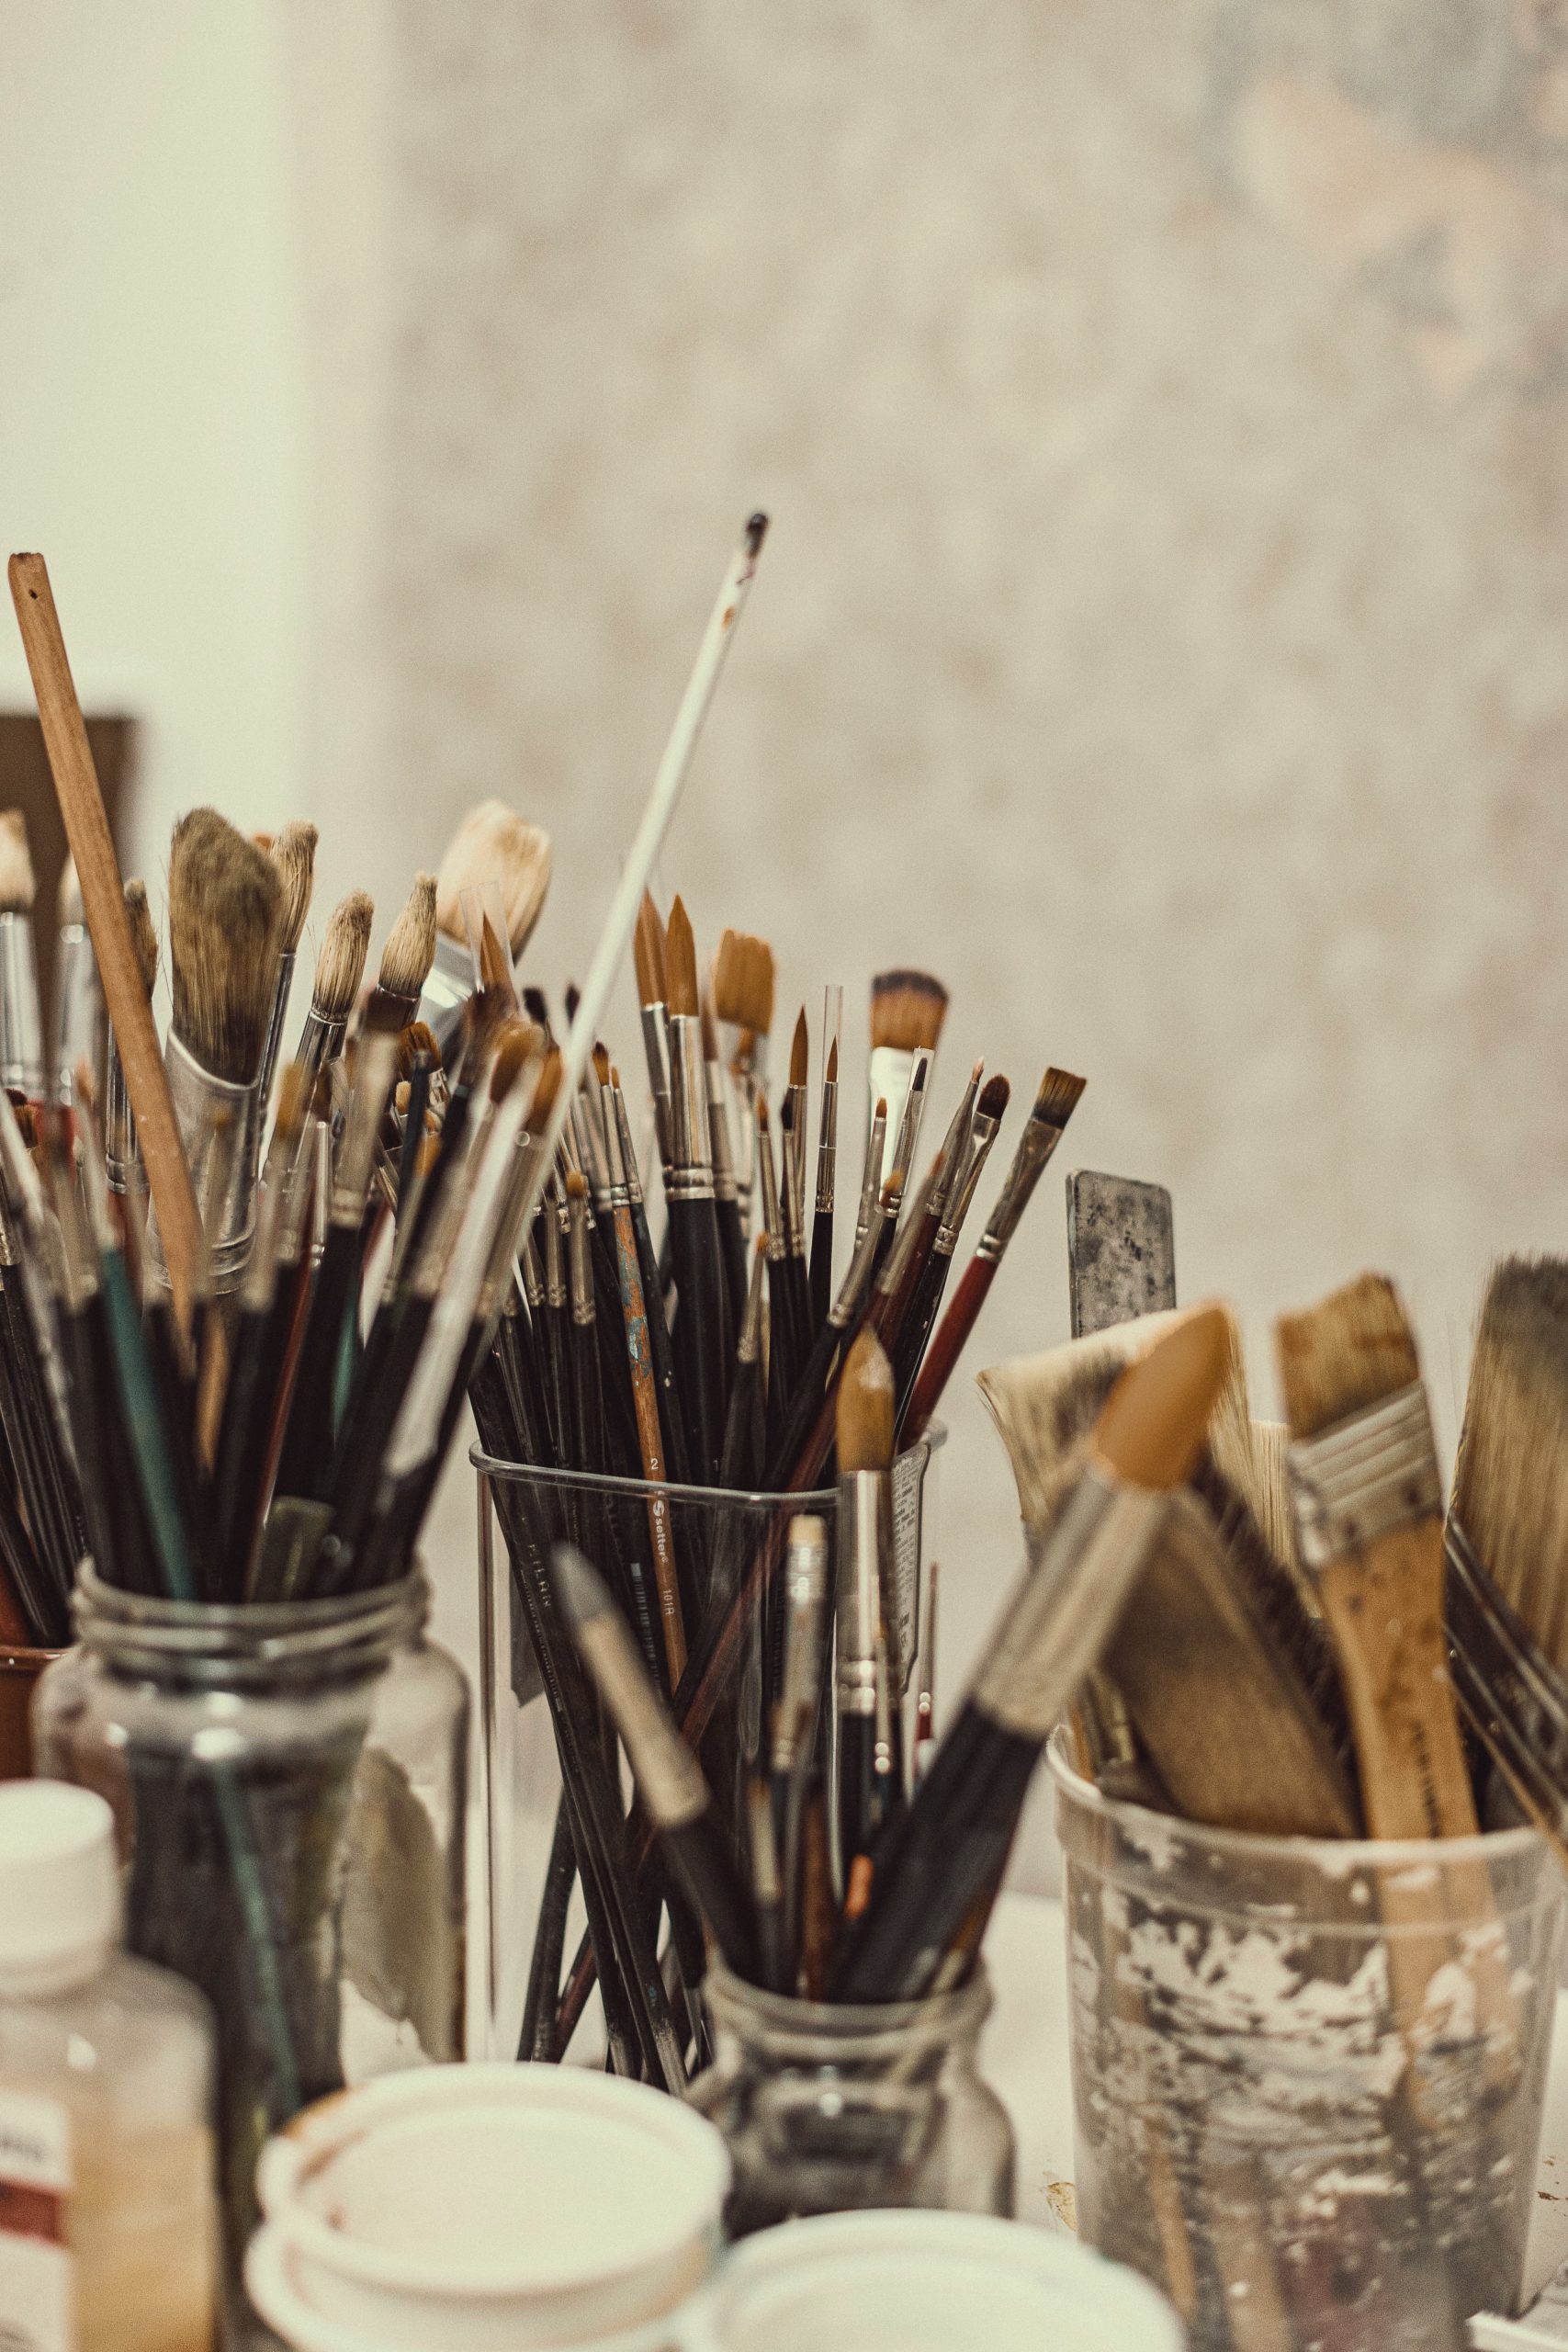 While you can buy paint brush holders, old jars and tins work just as well. Photo by Martin de Arriba on Unsplash
